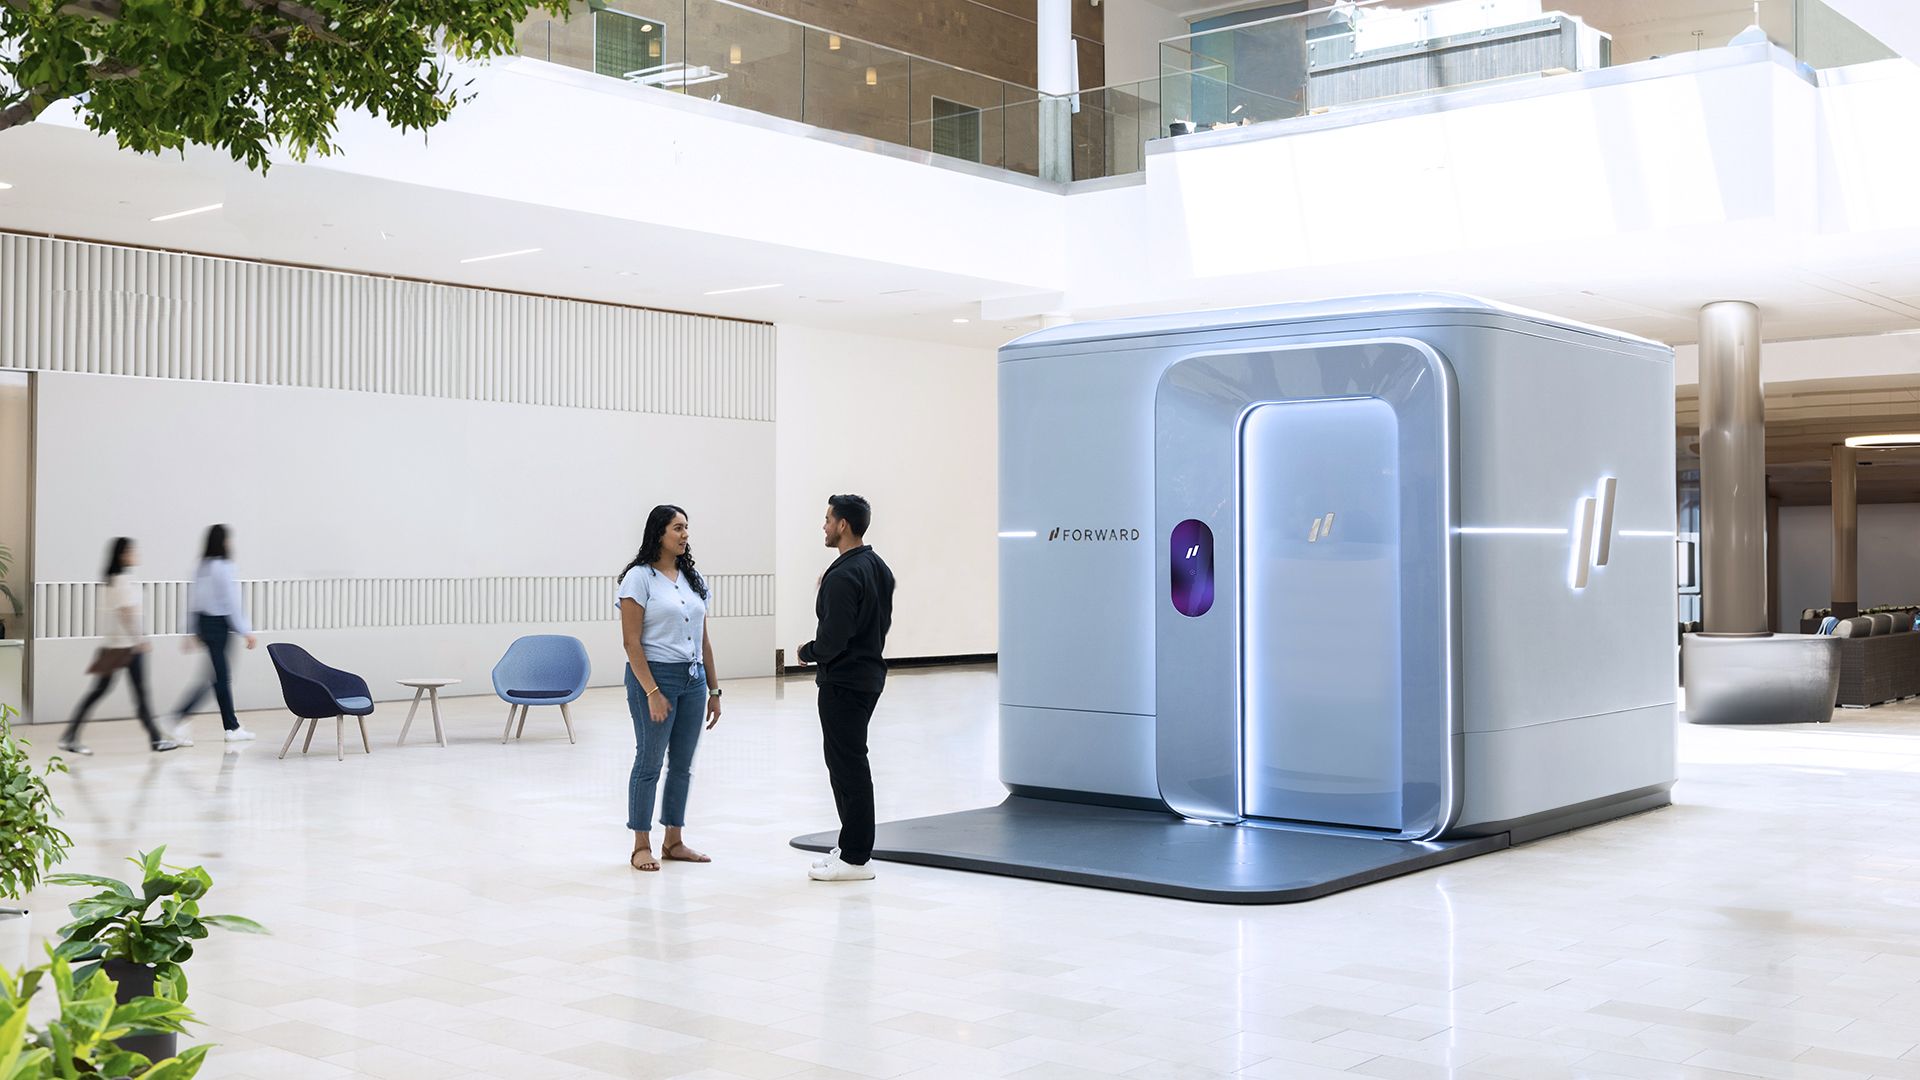 A freestanding walk-in "pod" that serves as a doctor's office, located in an indoor mall.